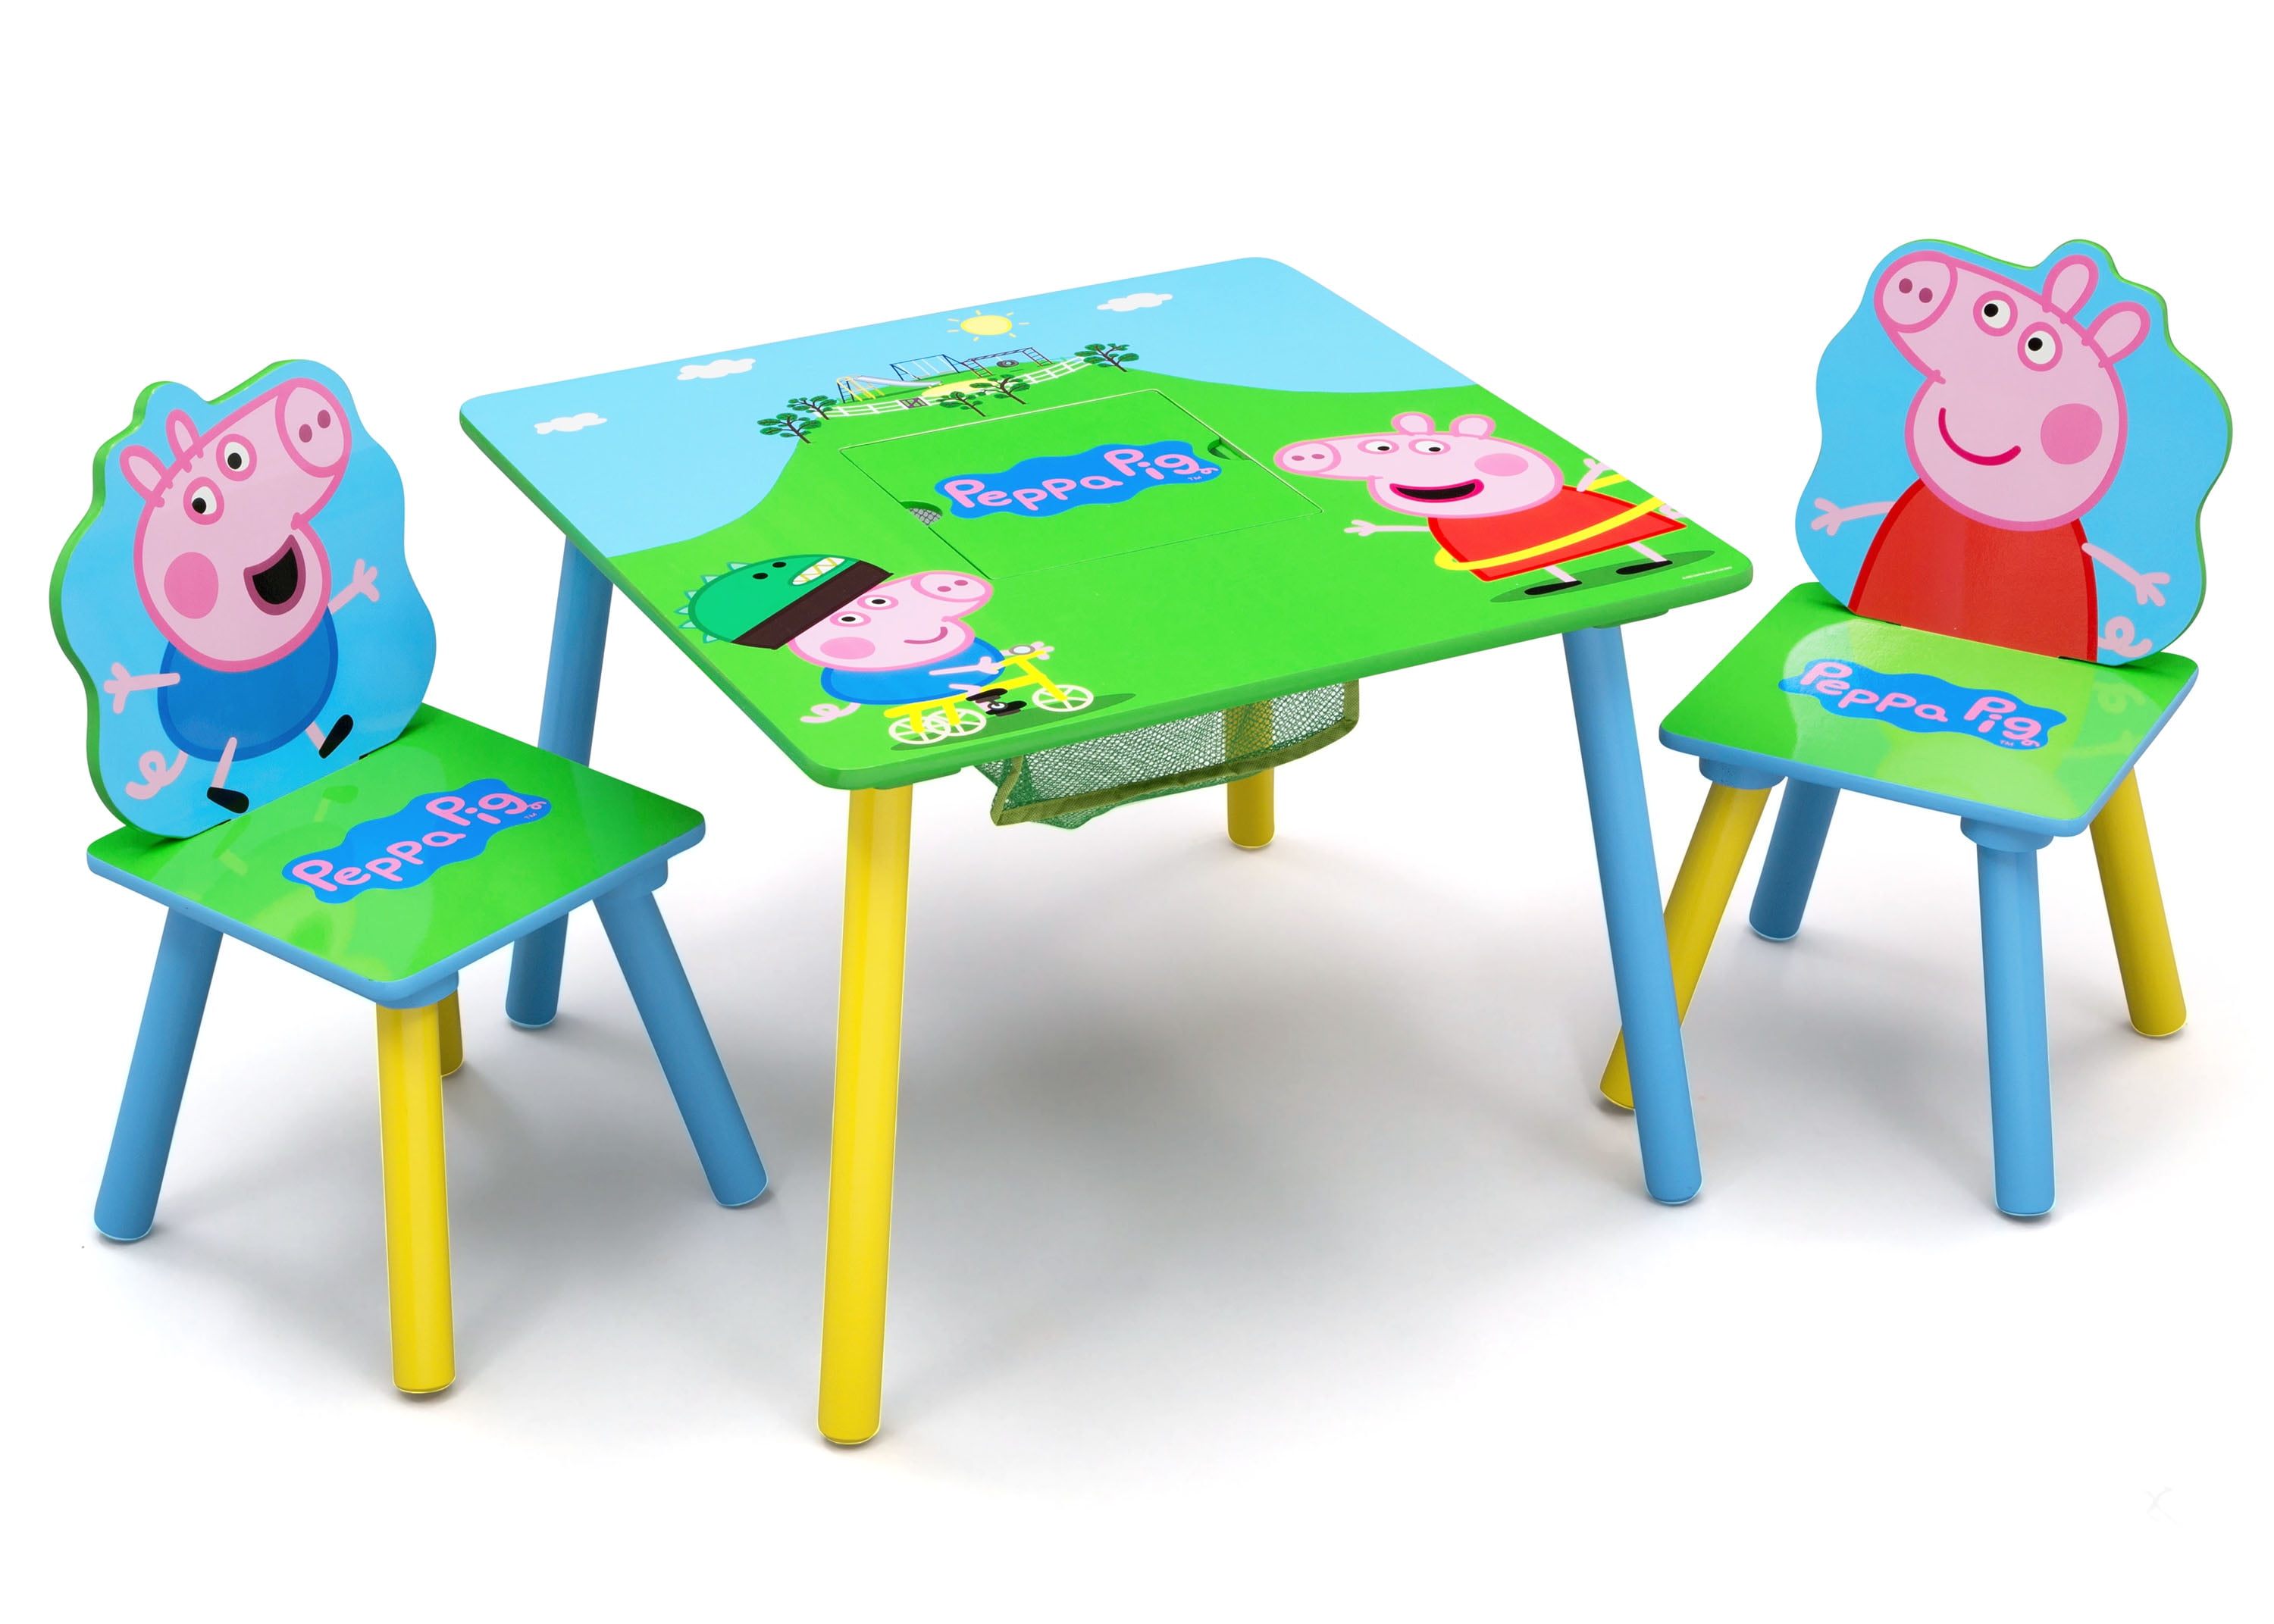 Peppa Pig Wood Kids Storage Table and Chairs Set by Delta Children